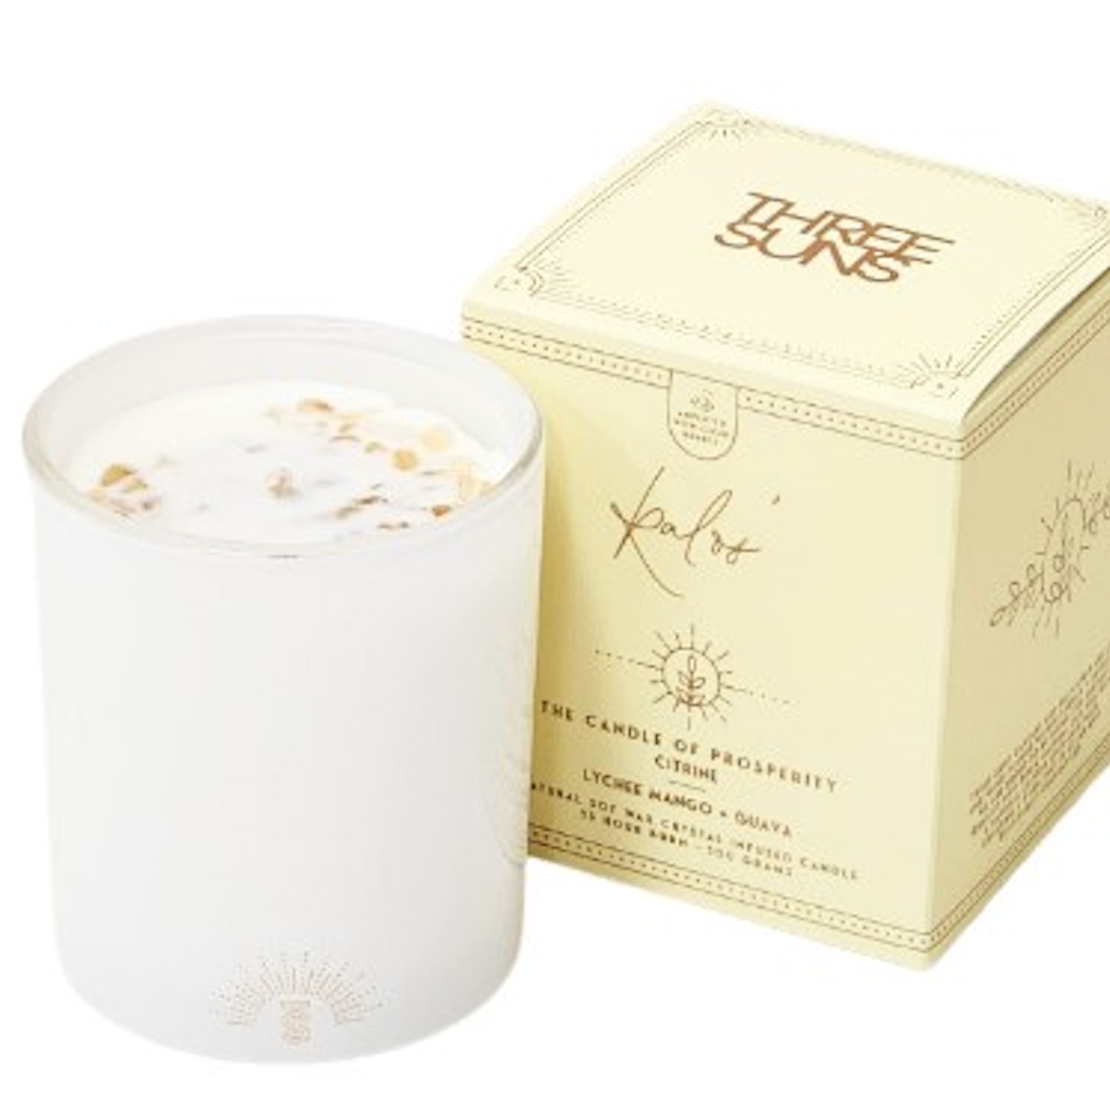 Kalos' | Crystal Infused Candle of Prosperity | Lychee Mango & Guava